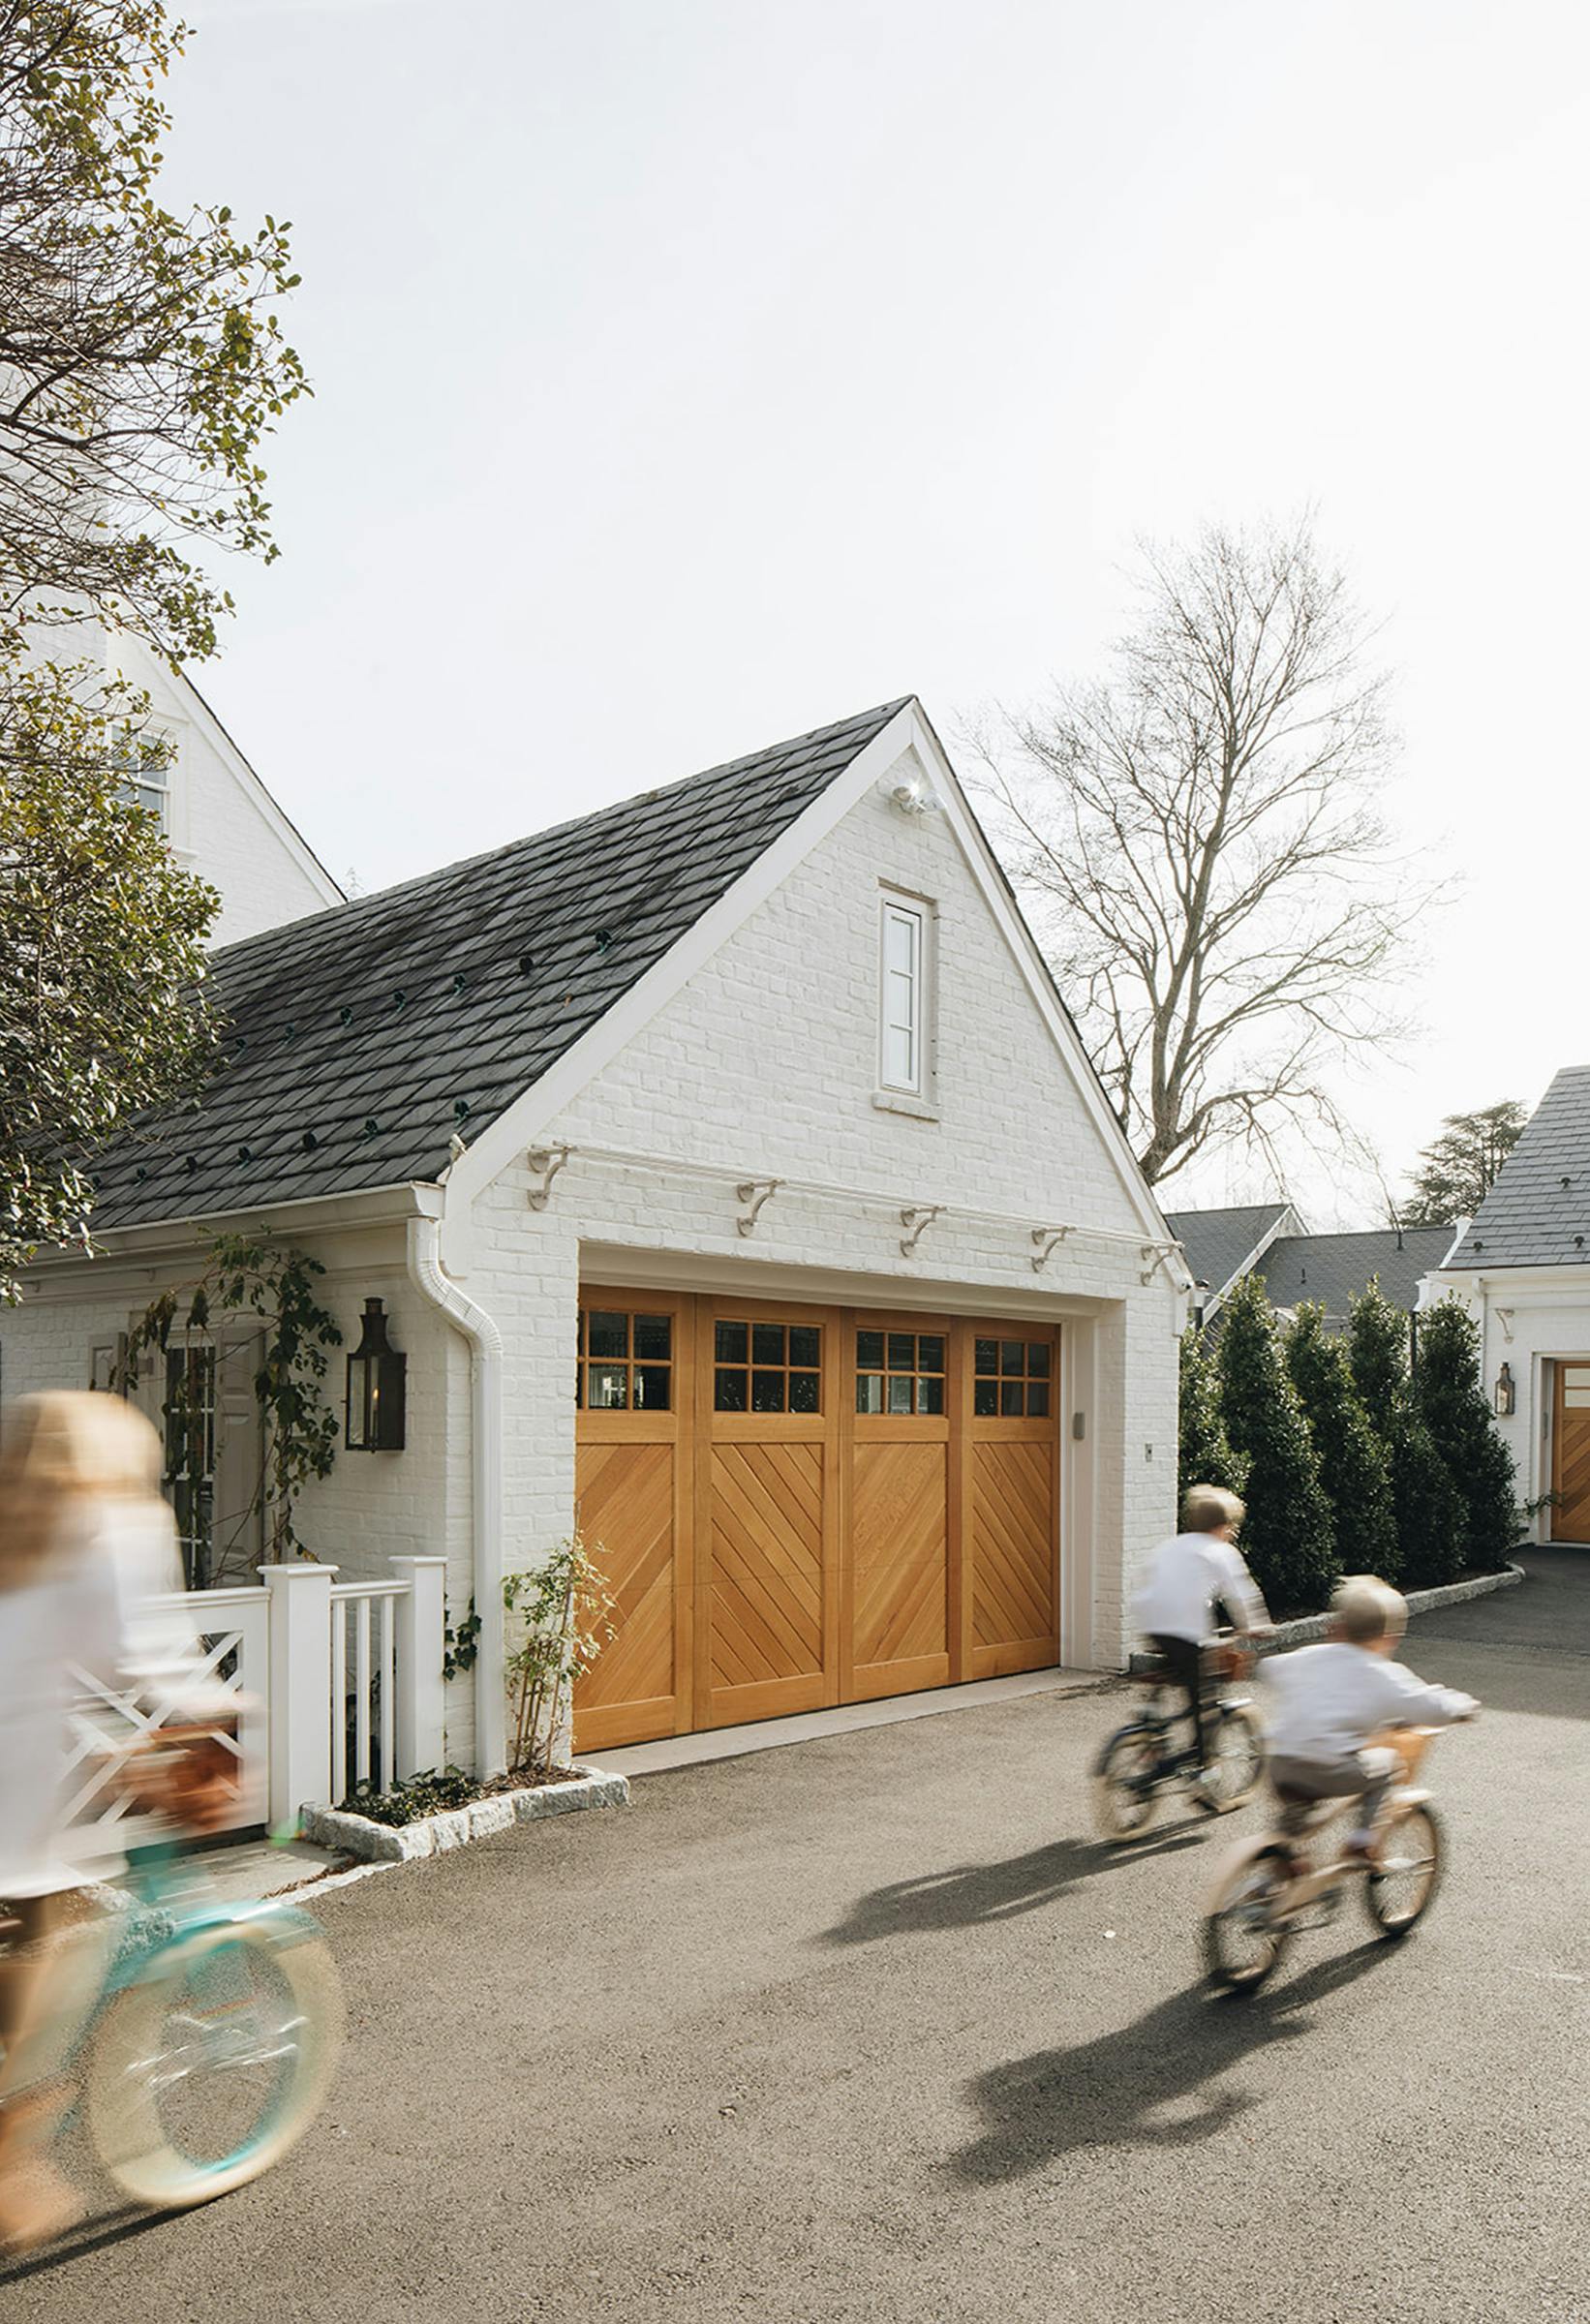 Nicole-Green-Design-Project-Chevy-Chase-Historic-East-Coast-Home-Exterior-Garage